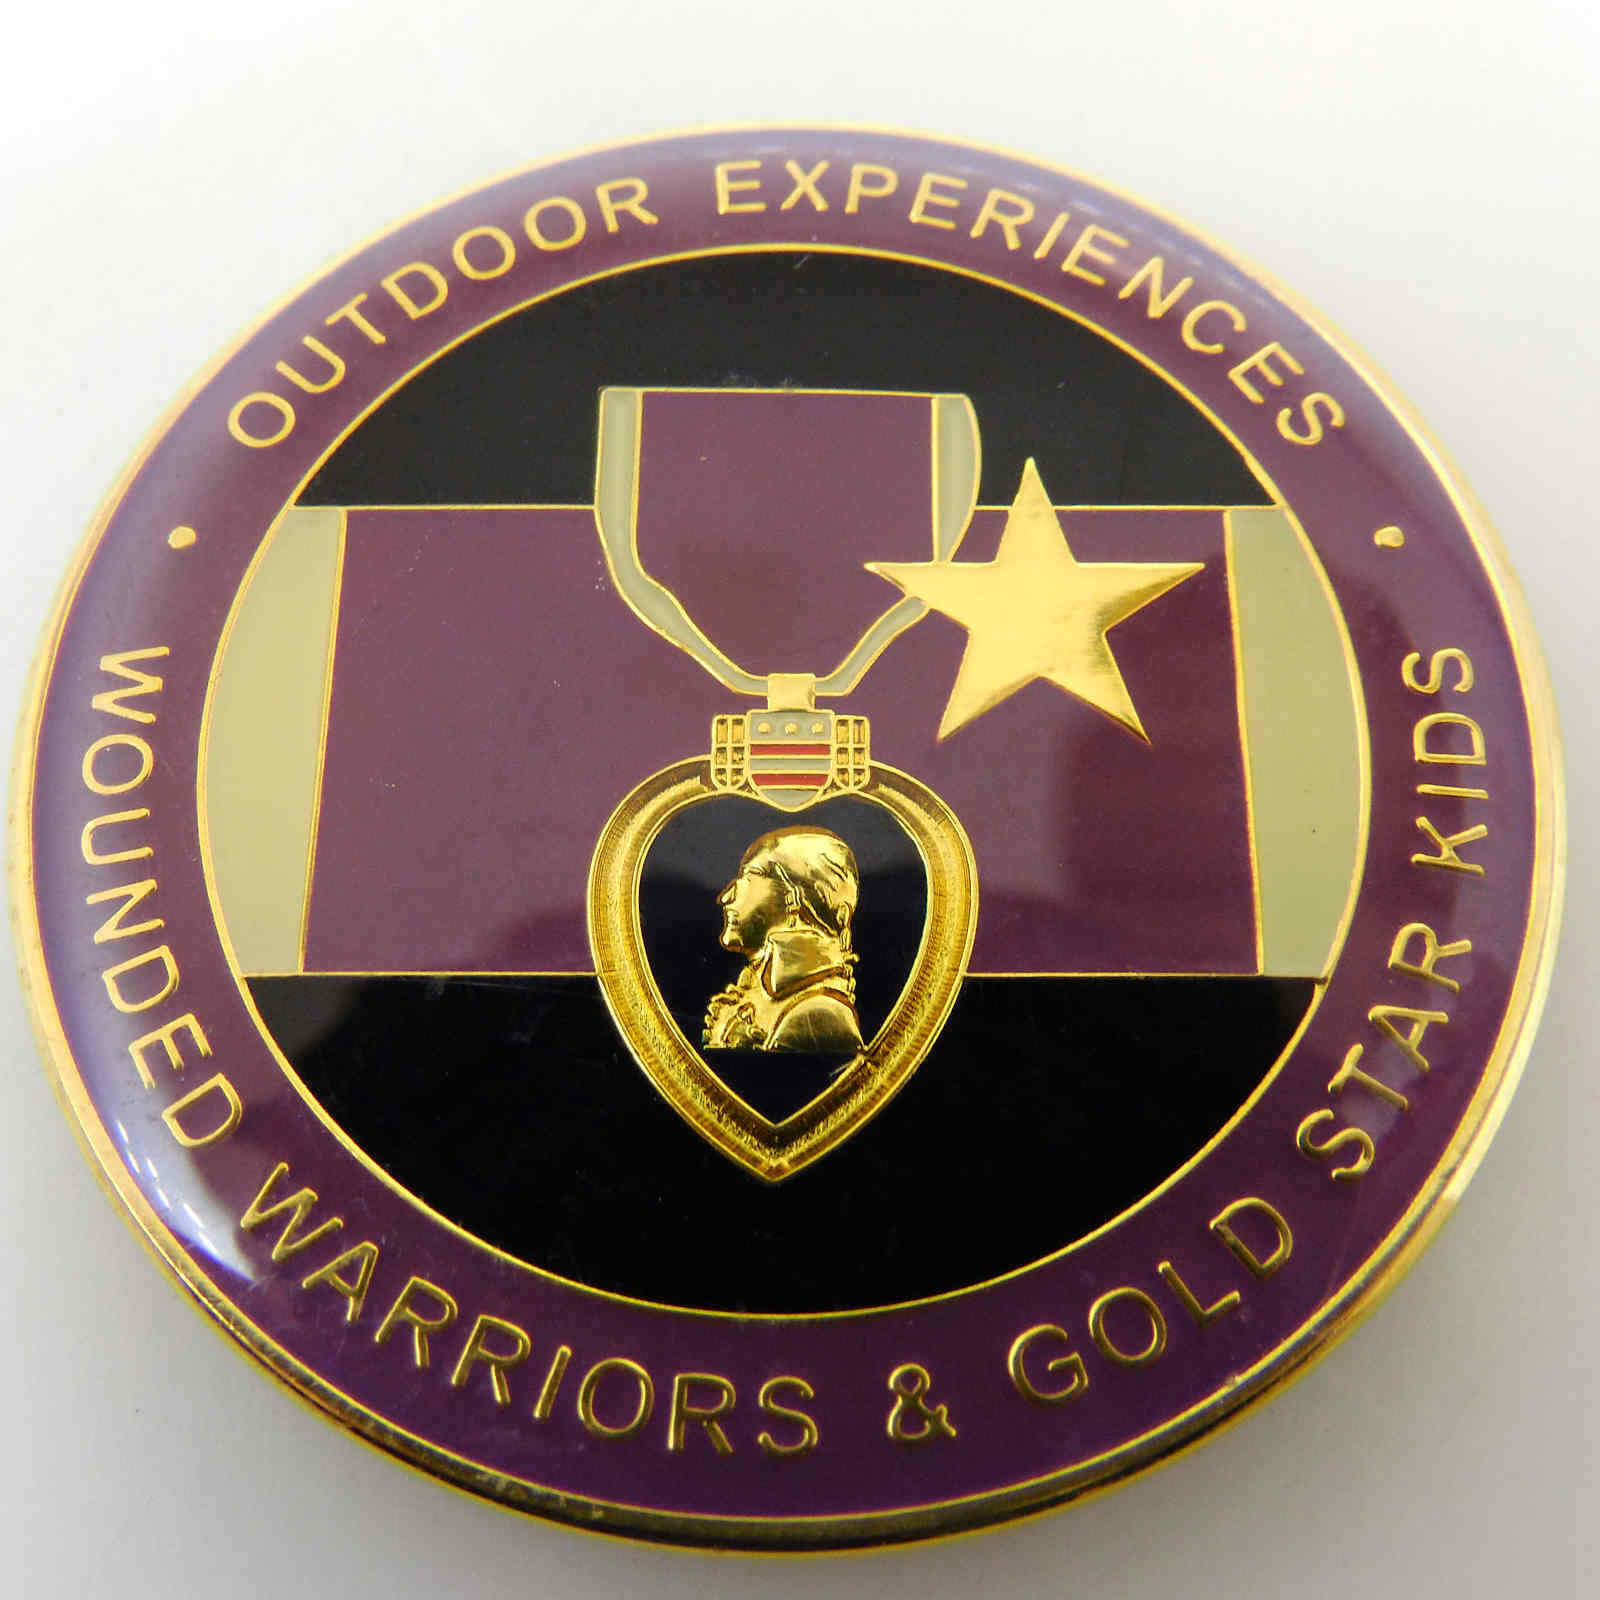 OUTDOOR EXPERIENCES WOUNDED WARRIORS GOLD STAR KIDS CHALLENGE COIN